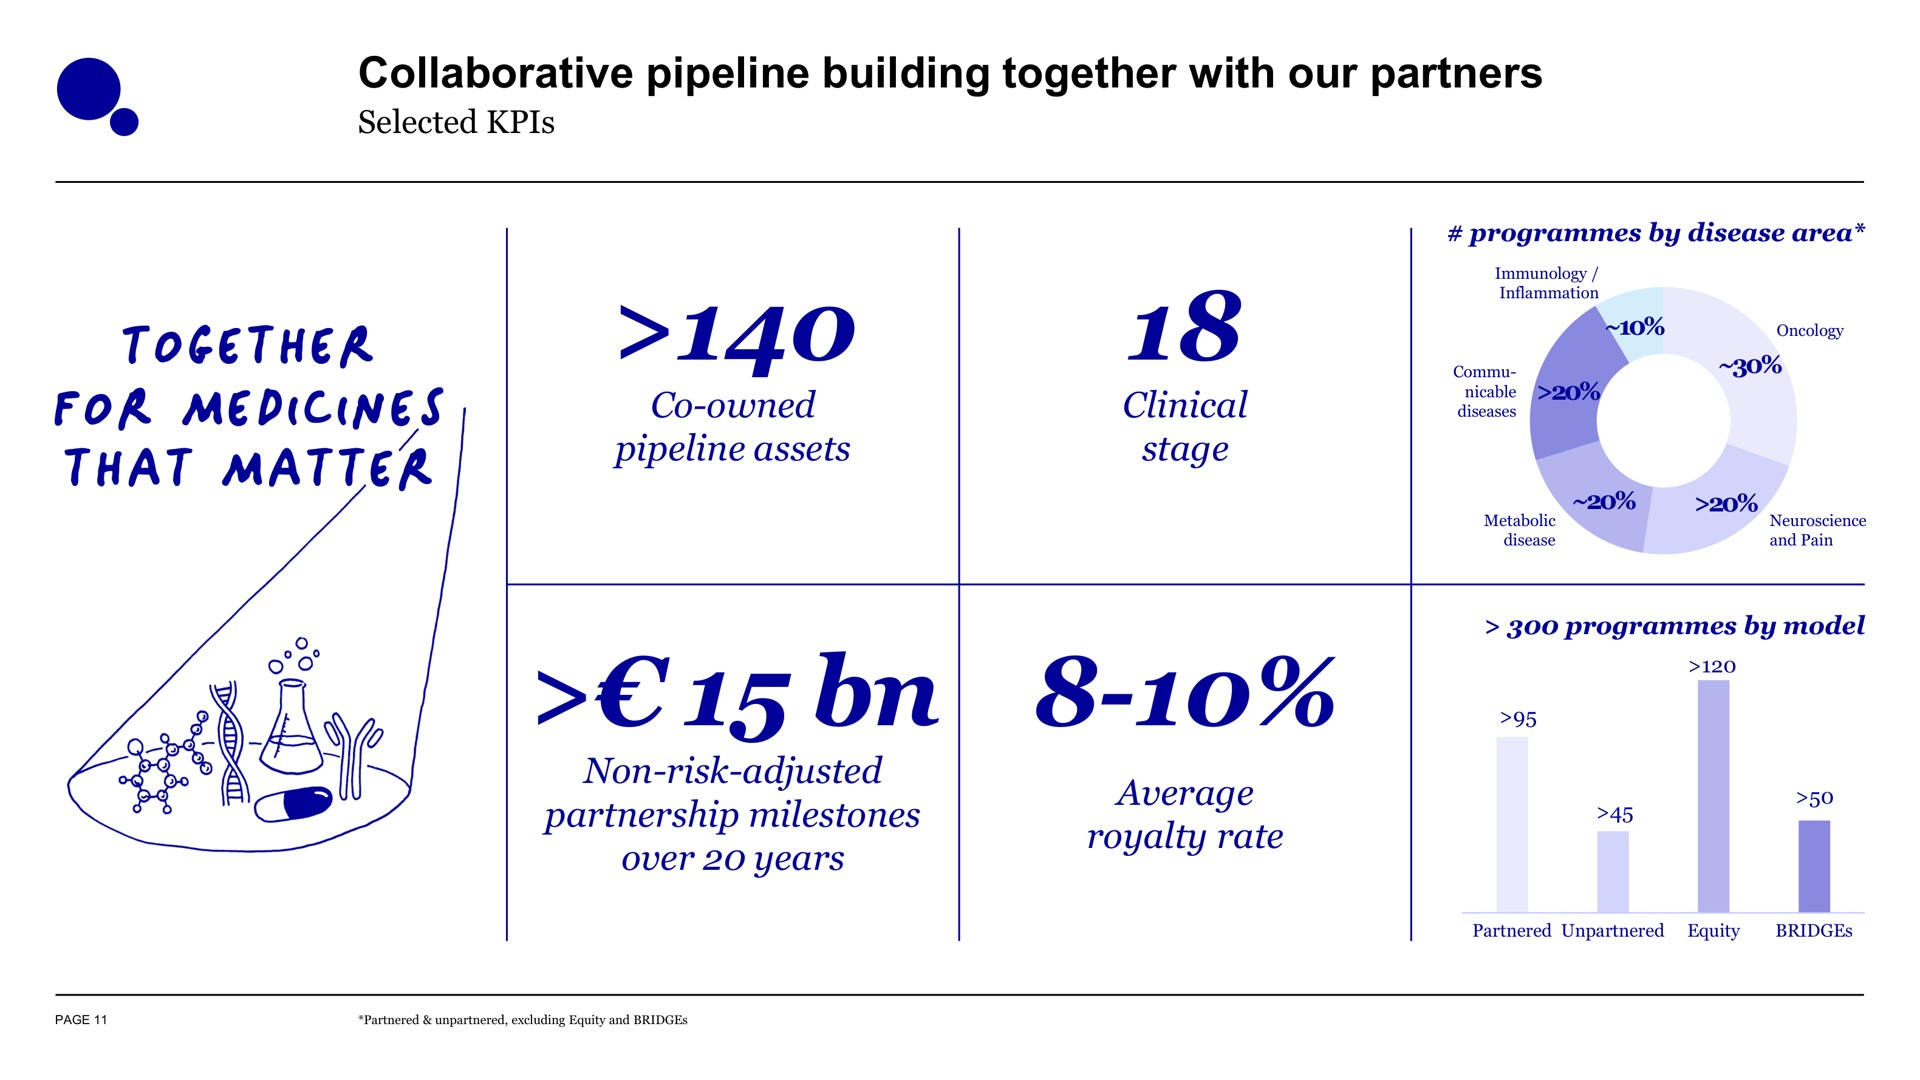 collaborative pipeline building together with our partners for medicines that matter | Evotec